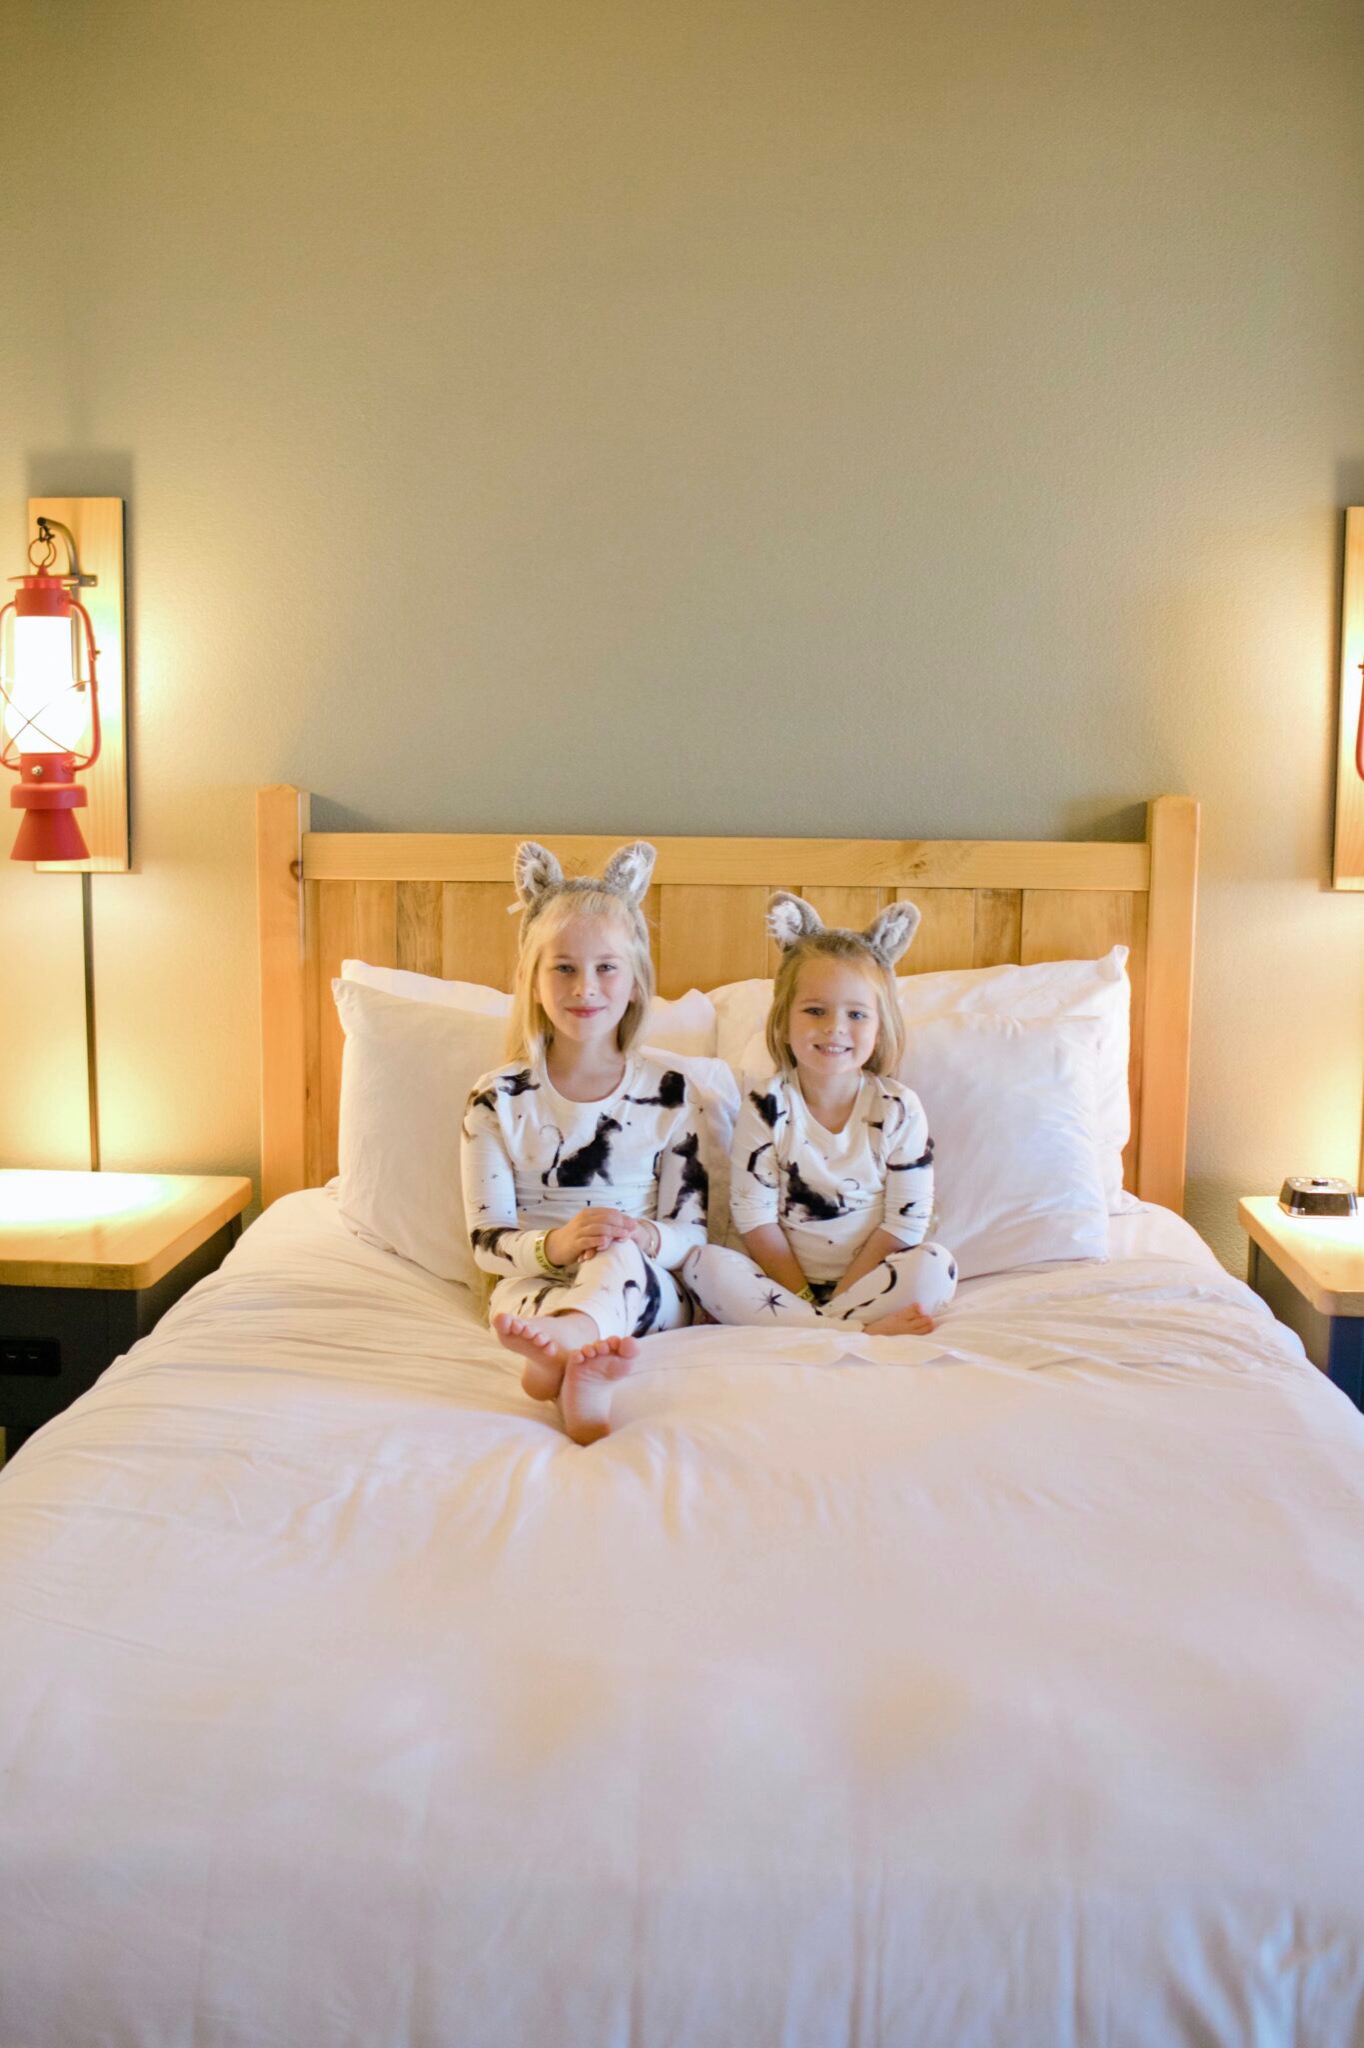 great wolf lodge in colorado springs, great wolf lodge, family at great wolf lodge